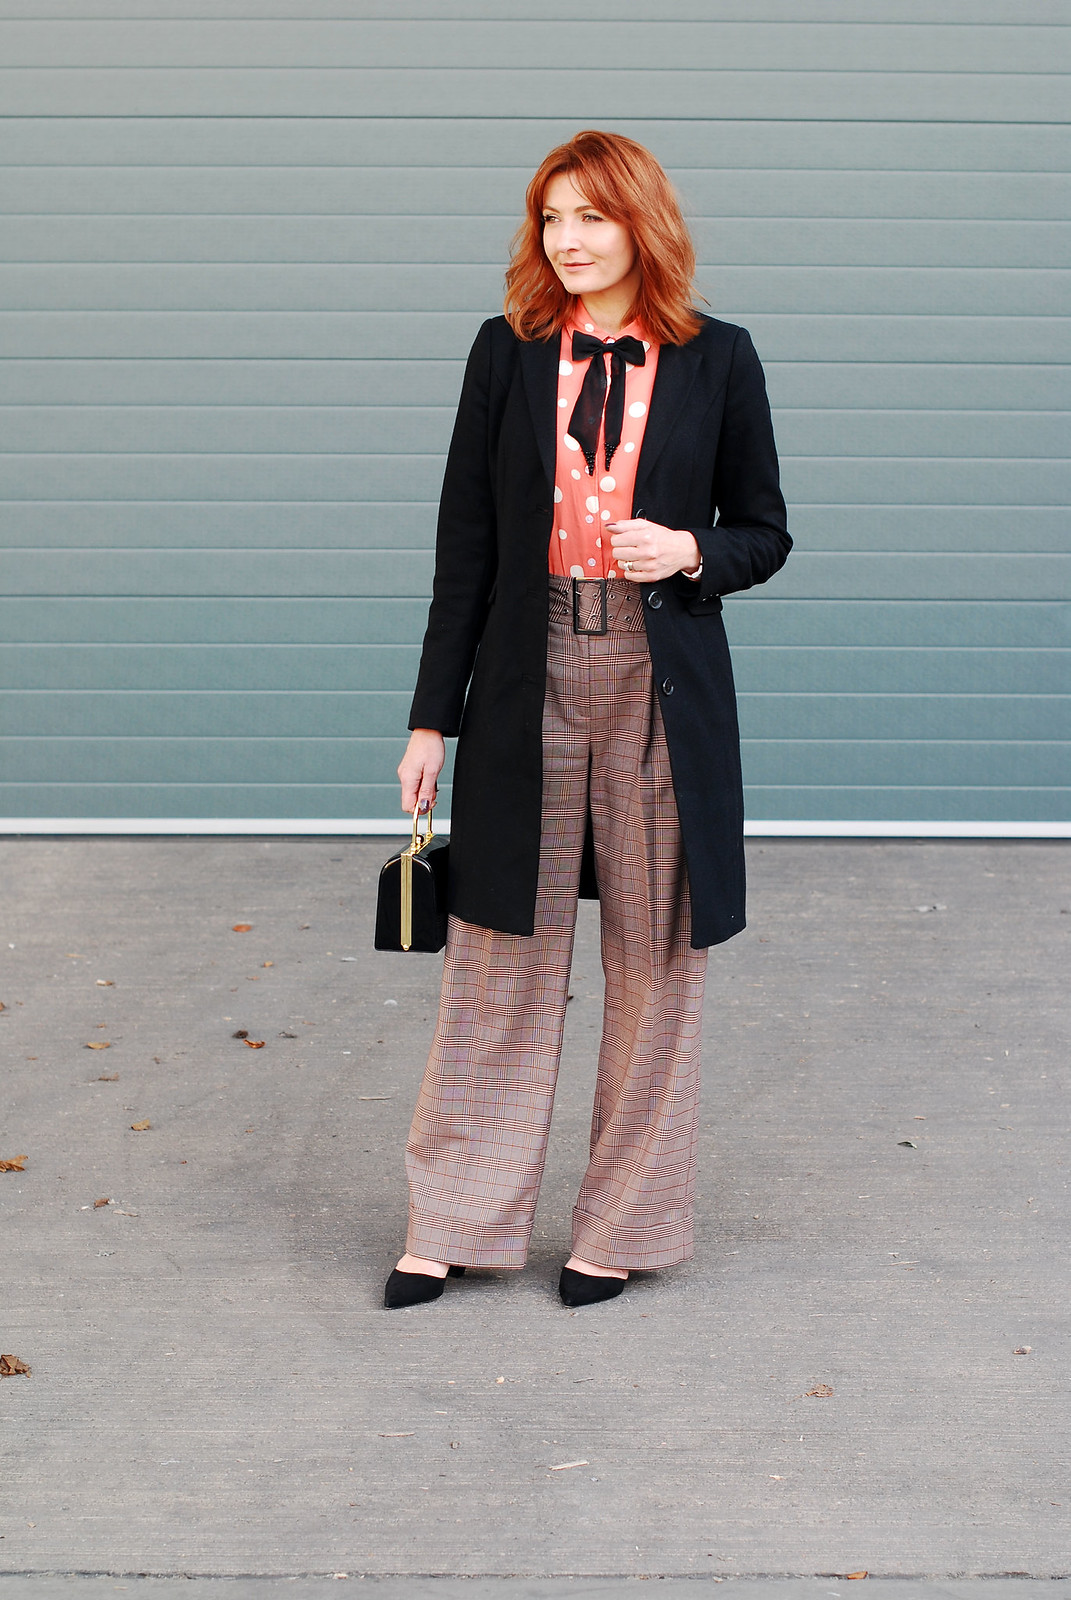 How to get the Katharine Hepburn look: Wide leg check turn up trousers masculine-cut black coat polka dot blouse with embellished black bow neck tie black box handbag cone-heeled black pointed shoes | Not Dressed As Lamb, over 40 style